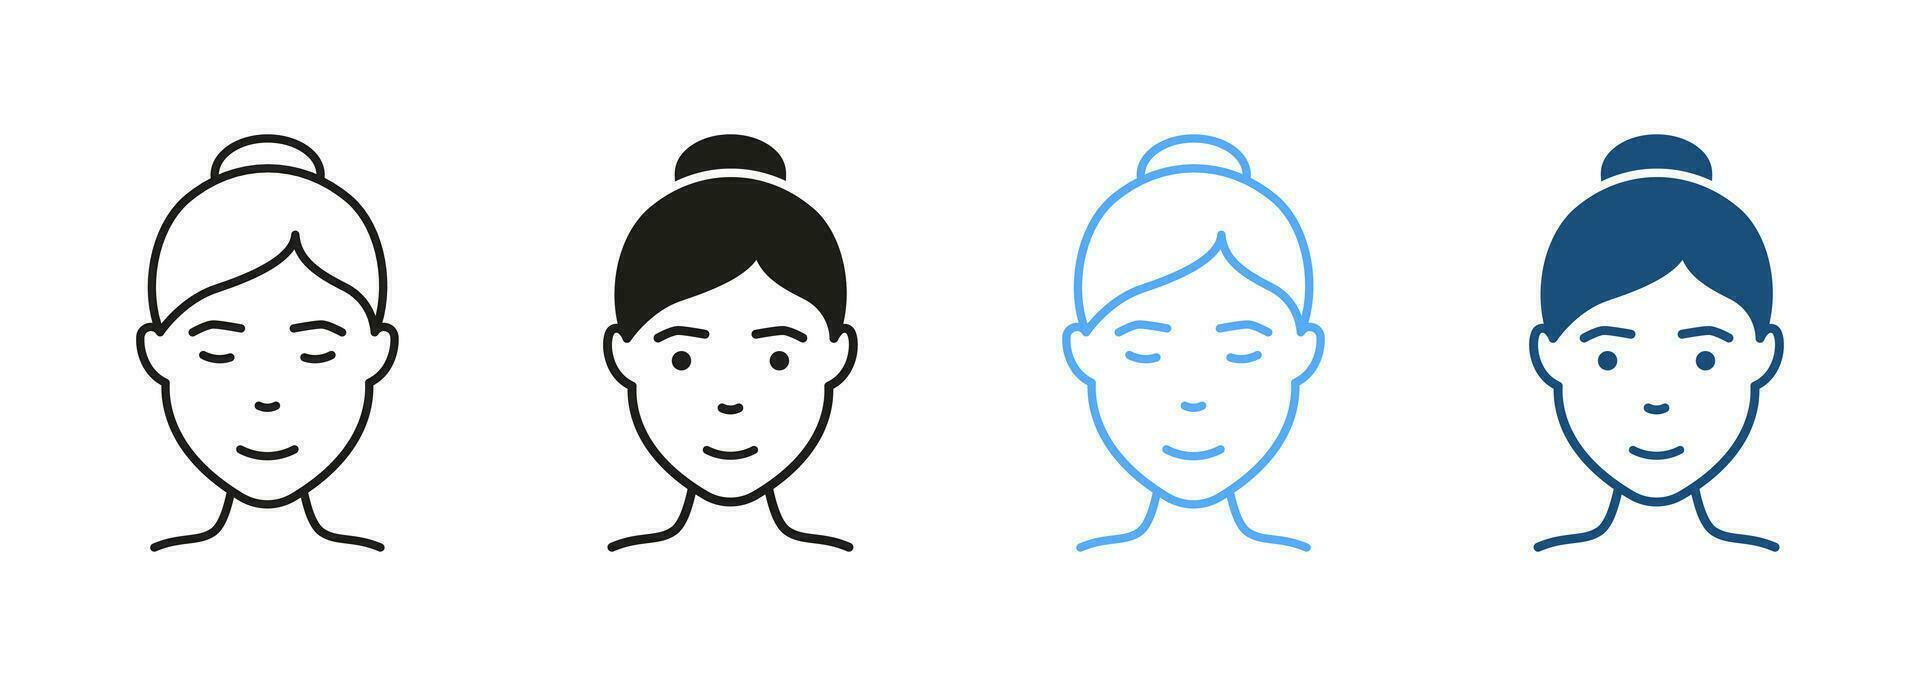 Woman, Lady Line and Silhouette Icon Set. Girl with Beauty Face and Hairstyle Pictogram. Female Avatar for User Profile Black and Color Symbol Collection. Isolated Vector Illustration.